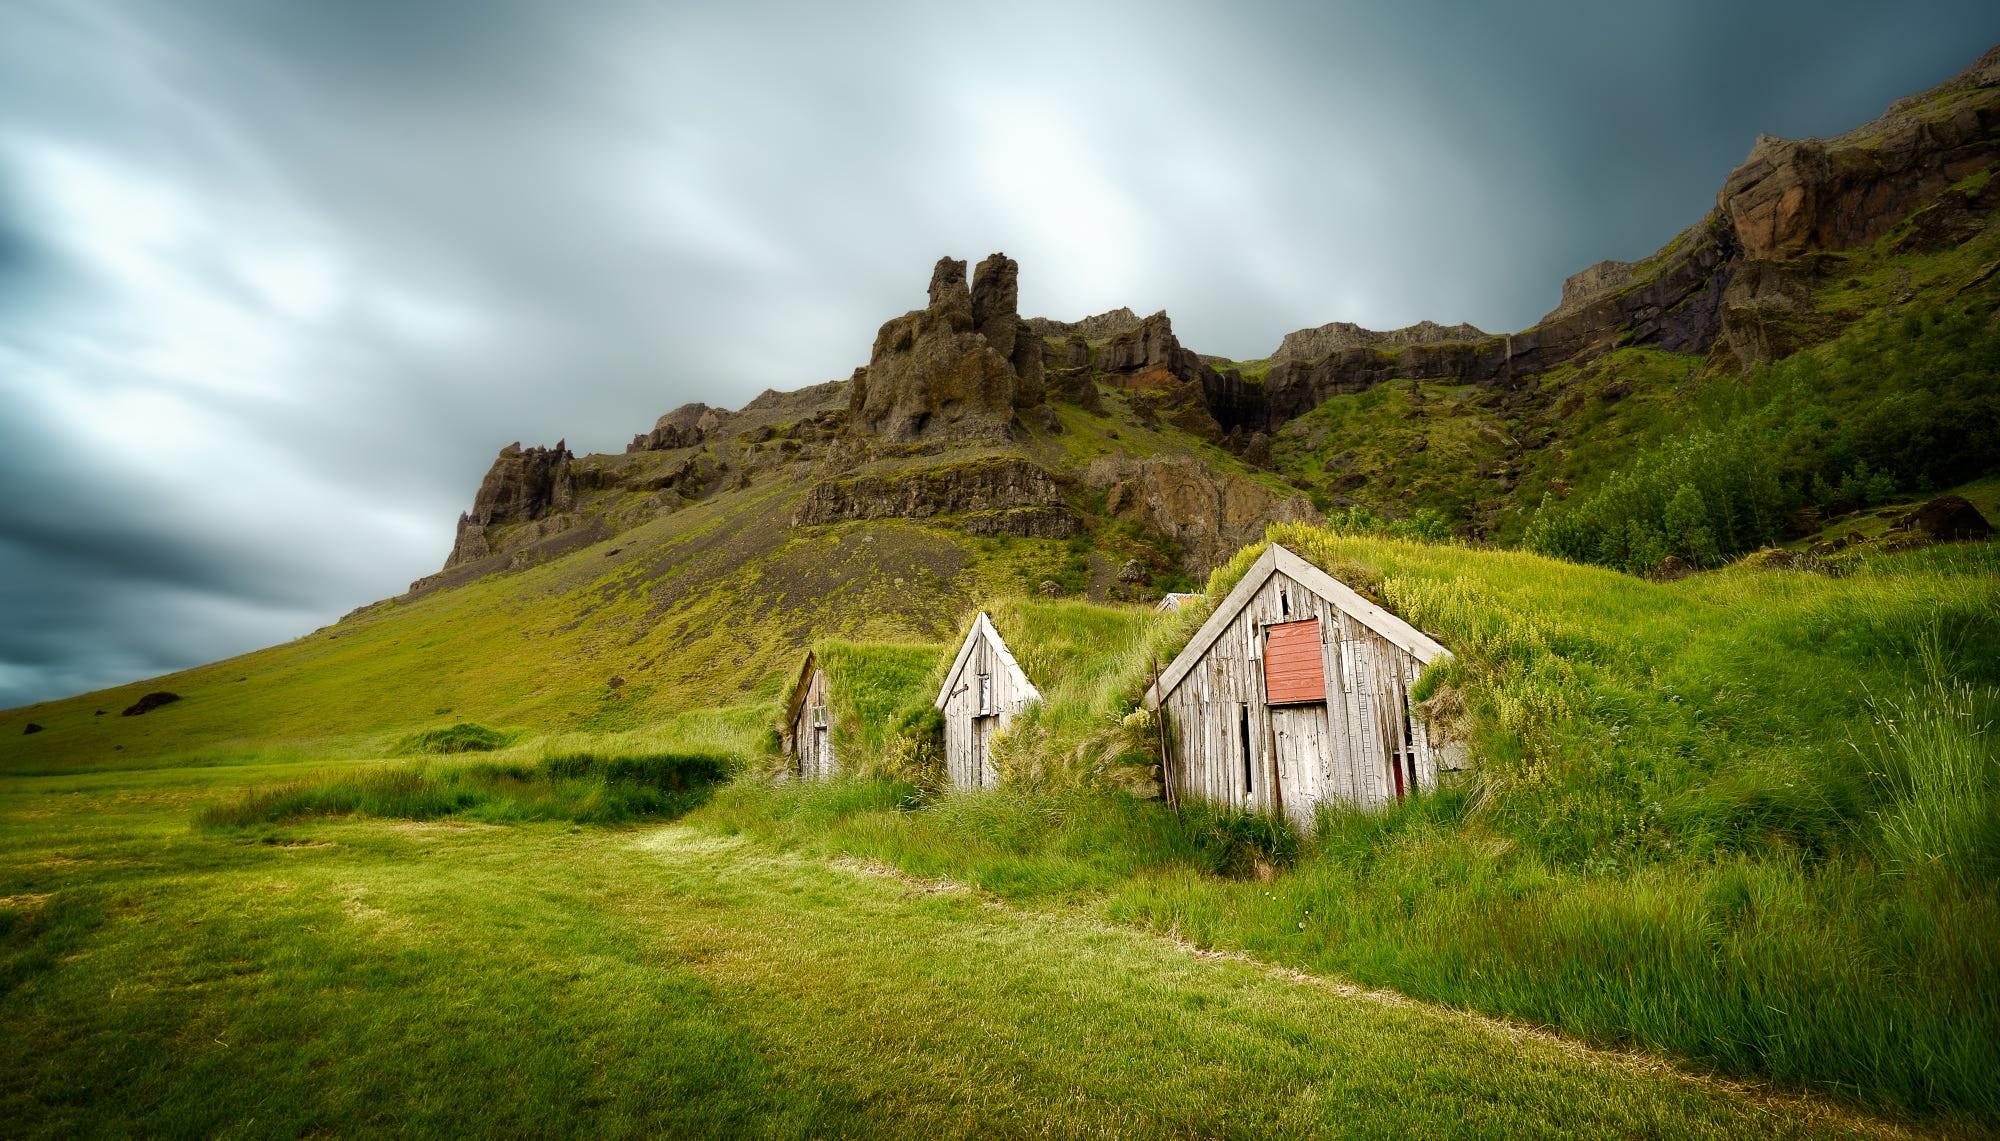 13th Century Grass Covered Sheds at Nupsstadur Farm, Southern Iceland